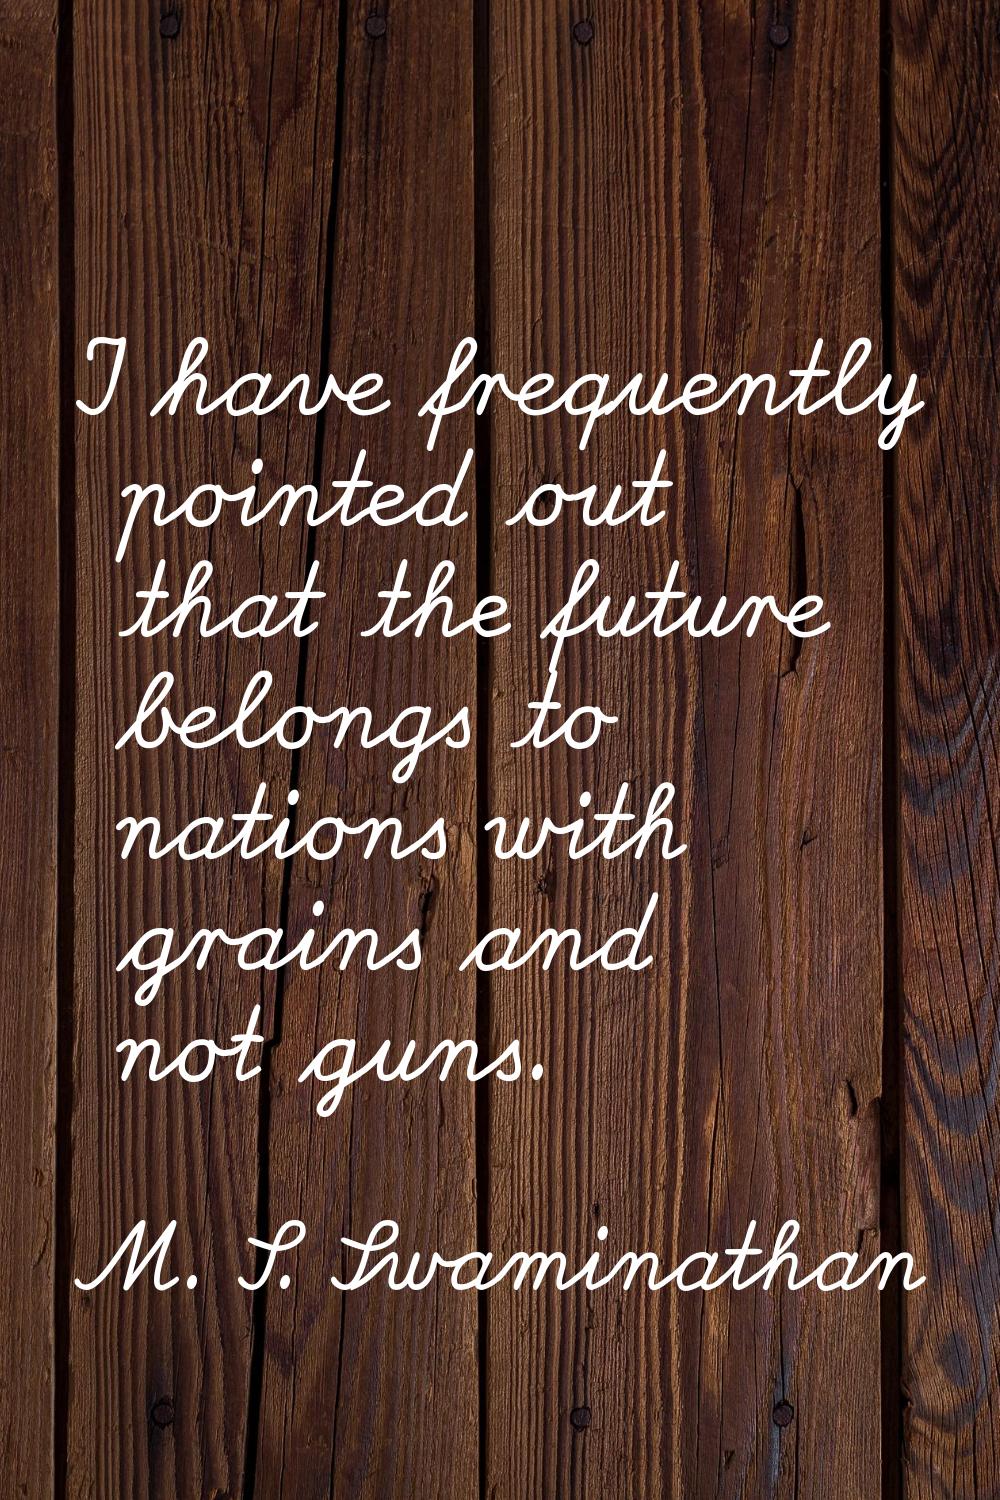 I have frequently pointed out that the future belongs to nations with grains and not guns.